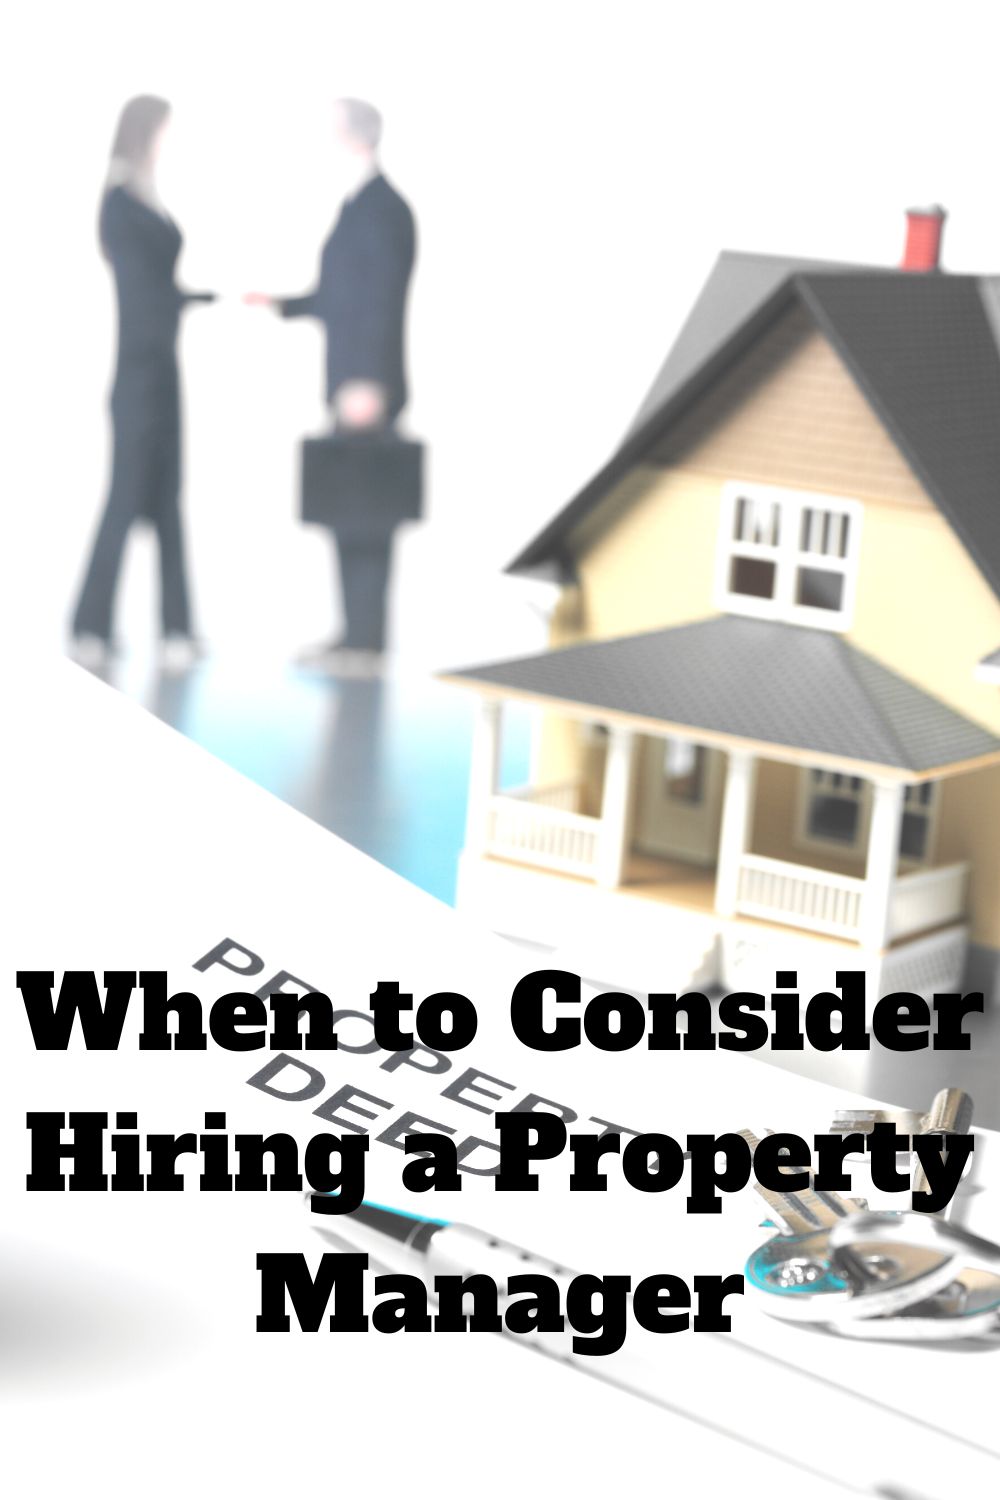 When to Consider Hiring a Property Manager